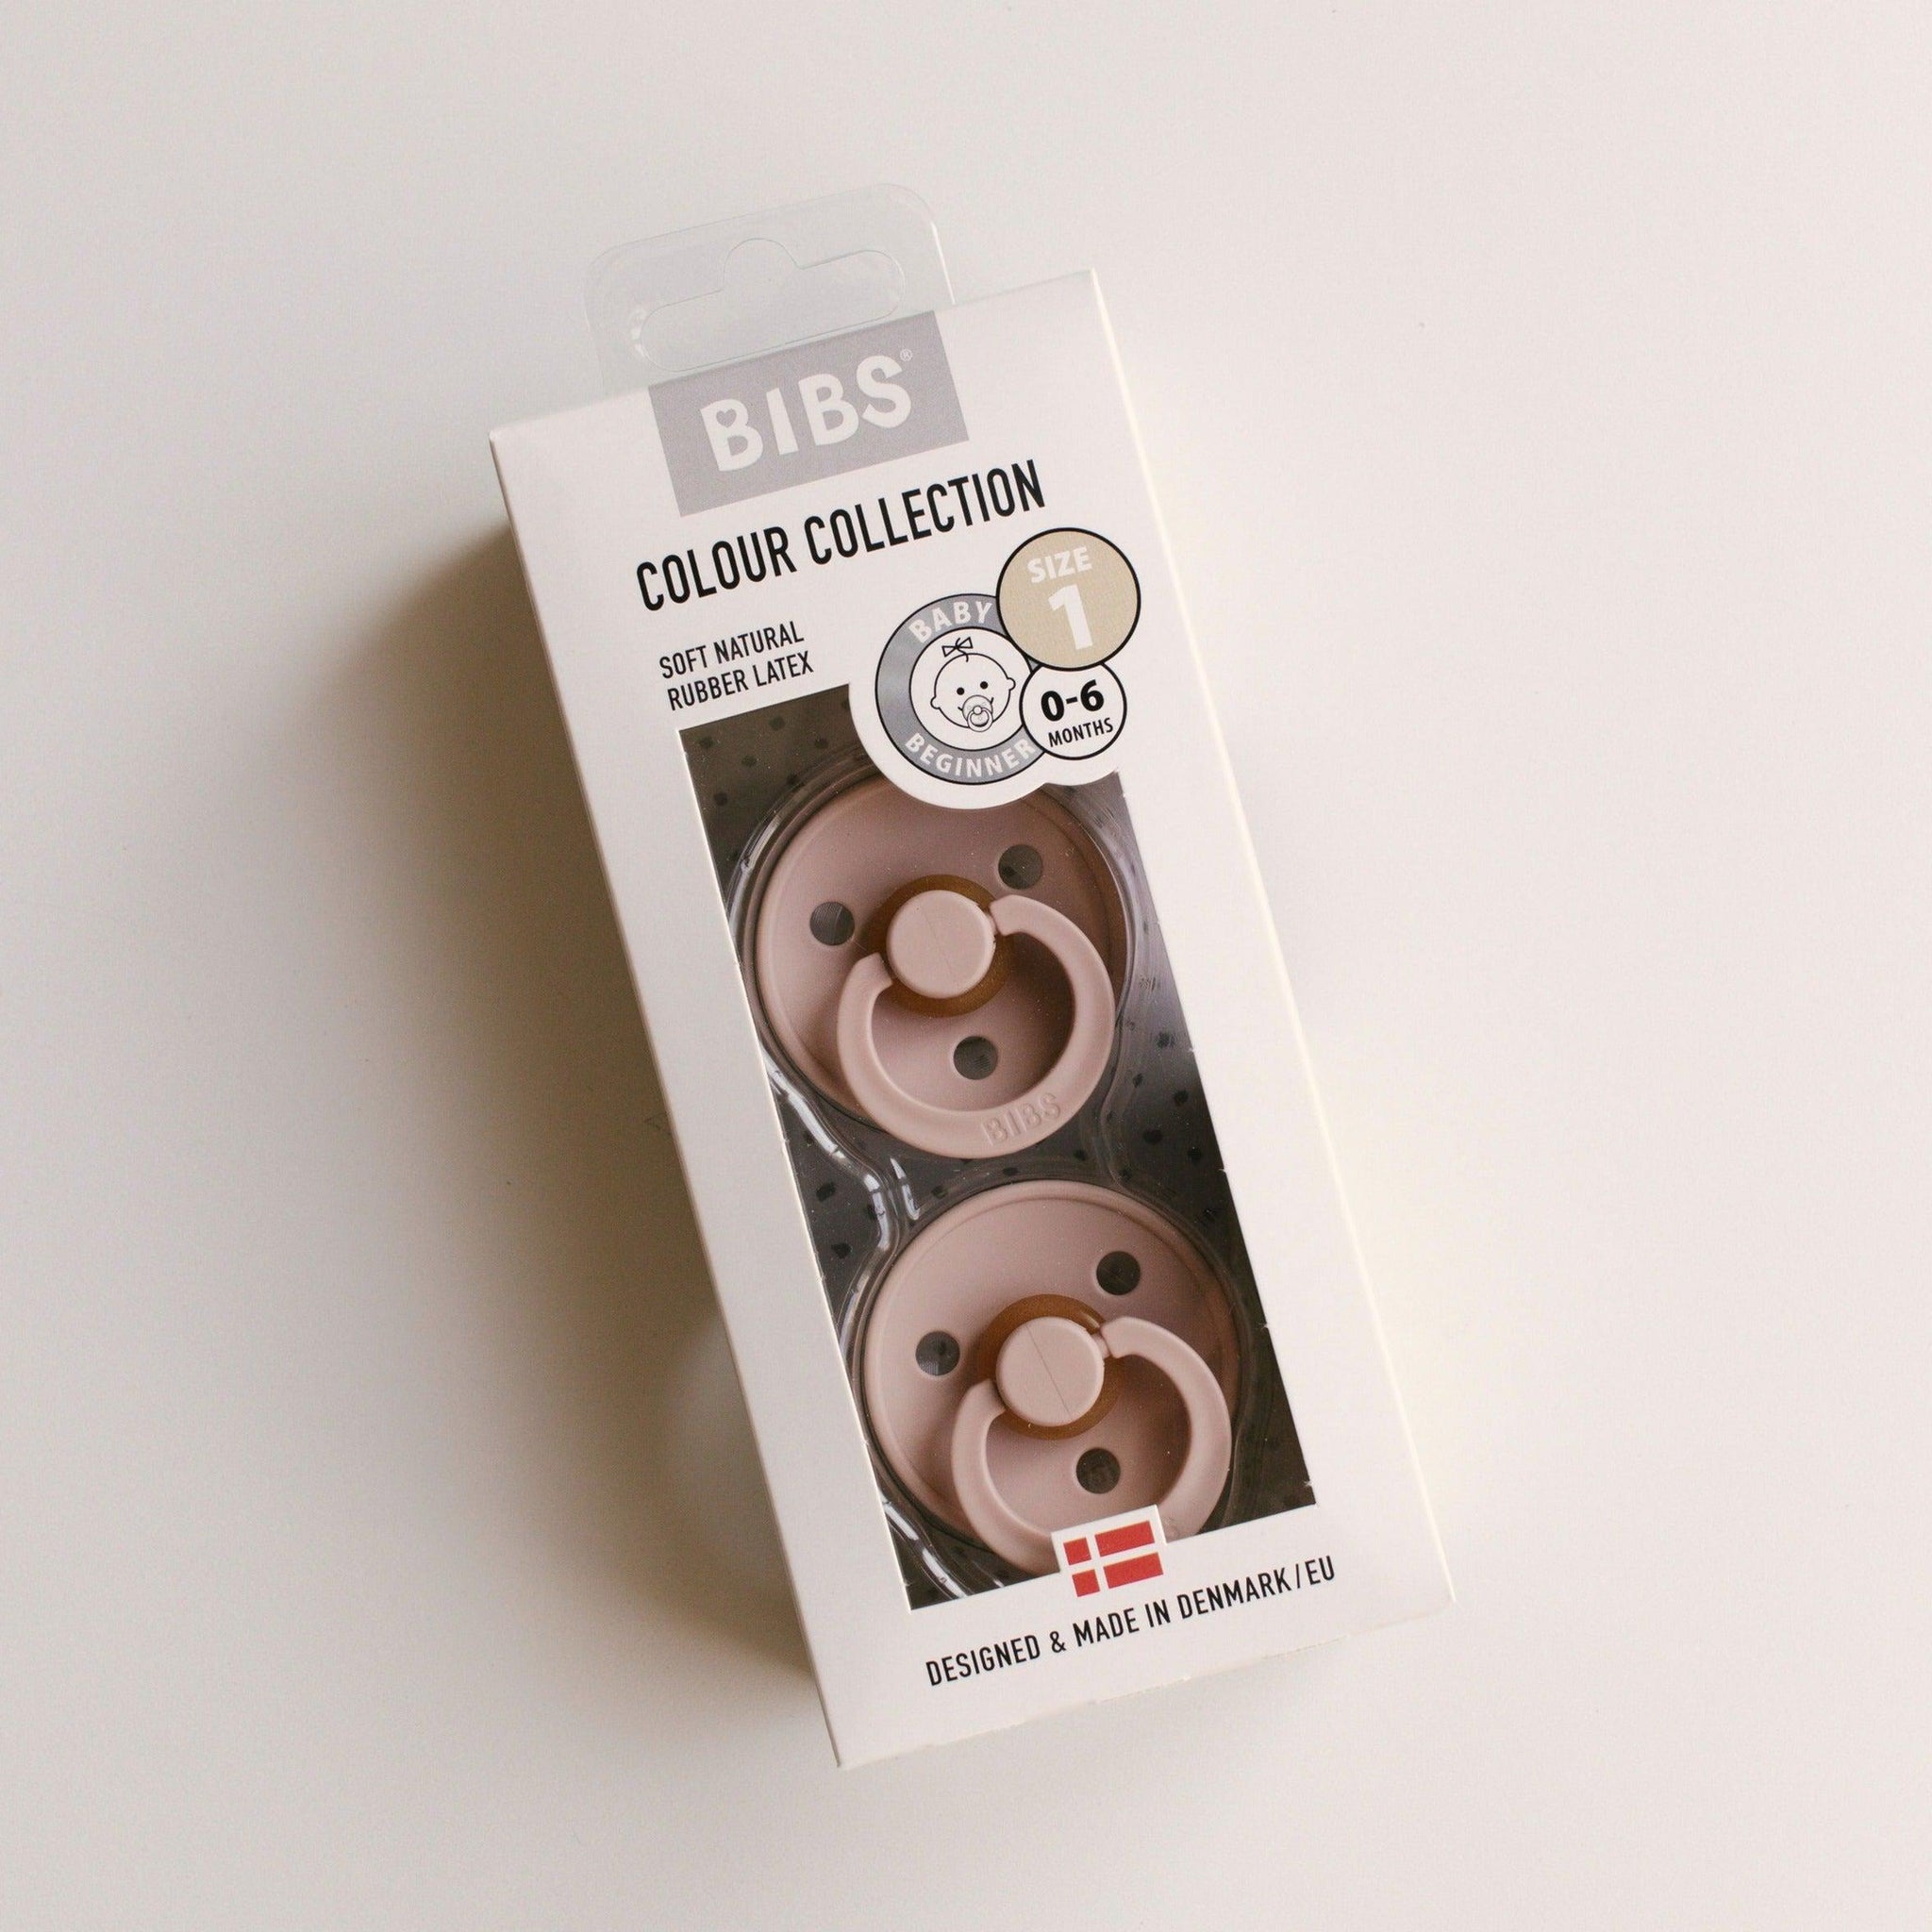 The BIBS dummy has been developed to support the child’s sucking reflex, and its shape mimics that of a breast. The teat is made from 100% natural rubber, which feels velvet soft, flexible and natural to suck on. The round lightweight shield curves away from the face, ensuring that air gets to the delicate skin around the mouth and reduces irritation.